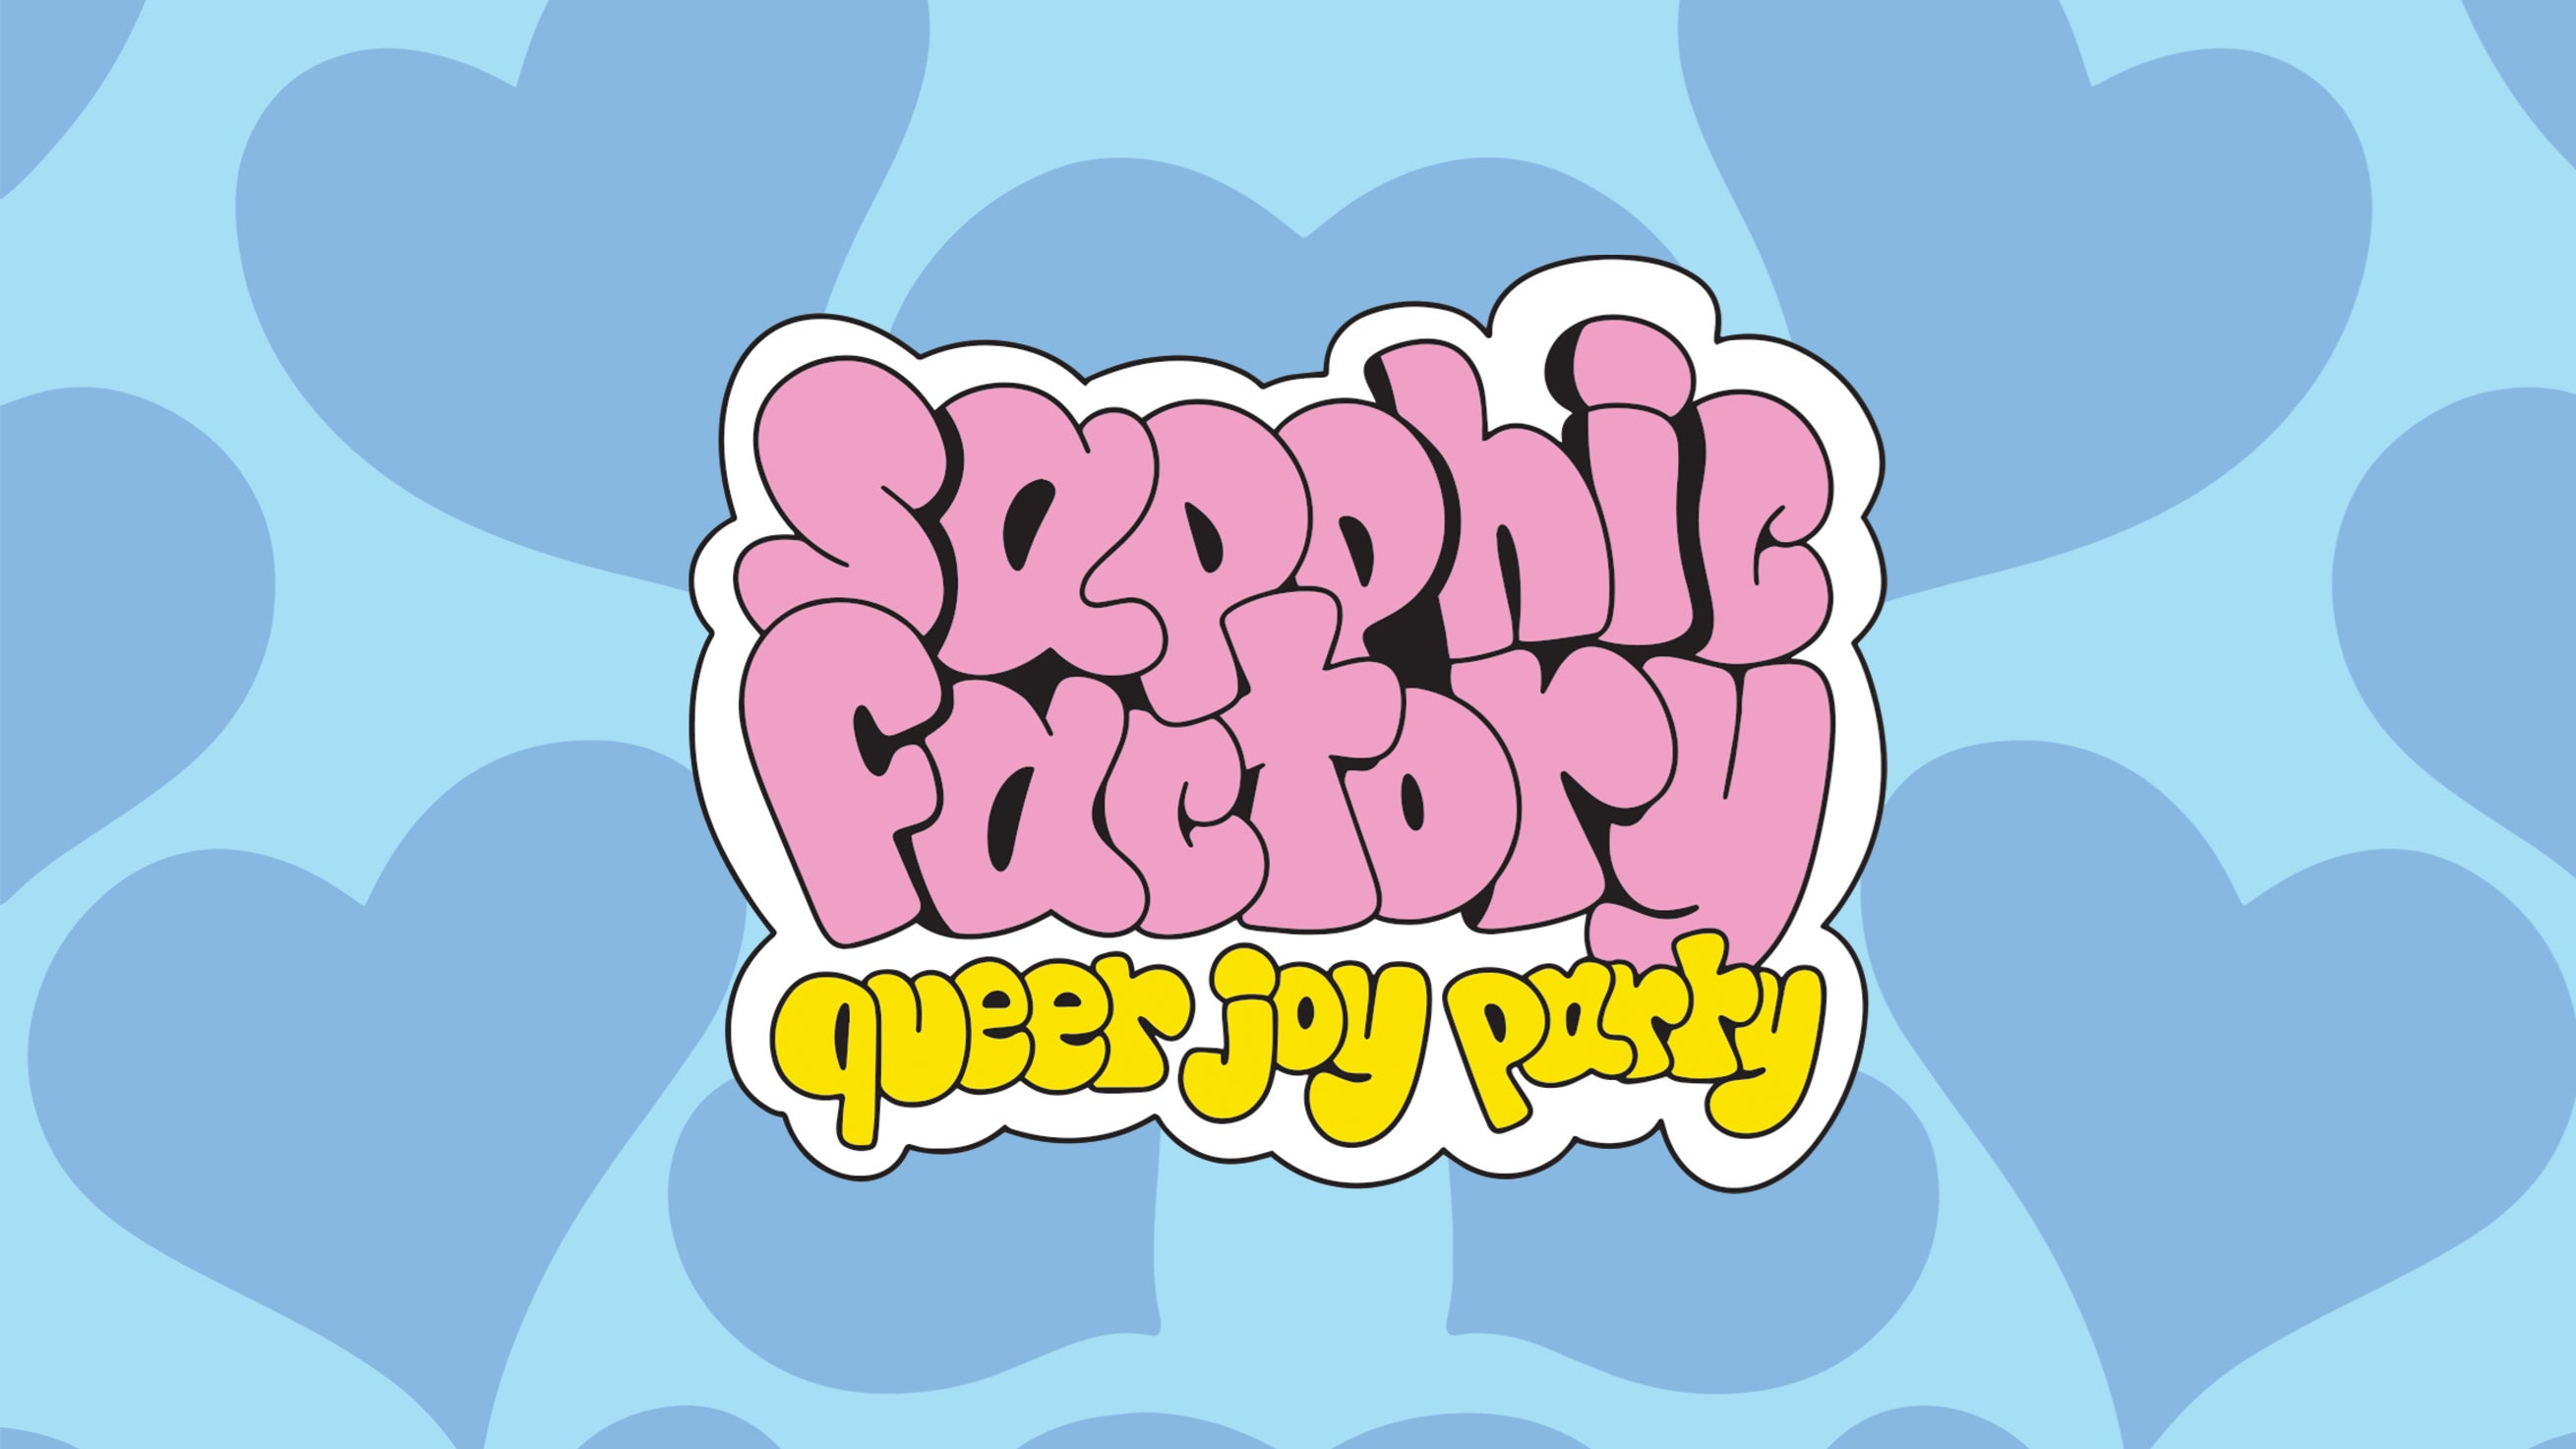 sapphic factory: queer joy party | 18+ in Atlanta promo photo for Local presale offer code